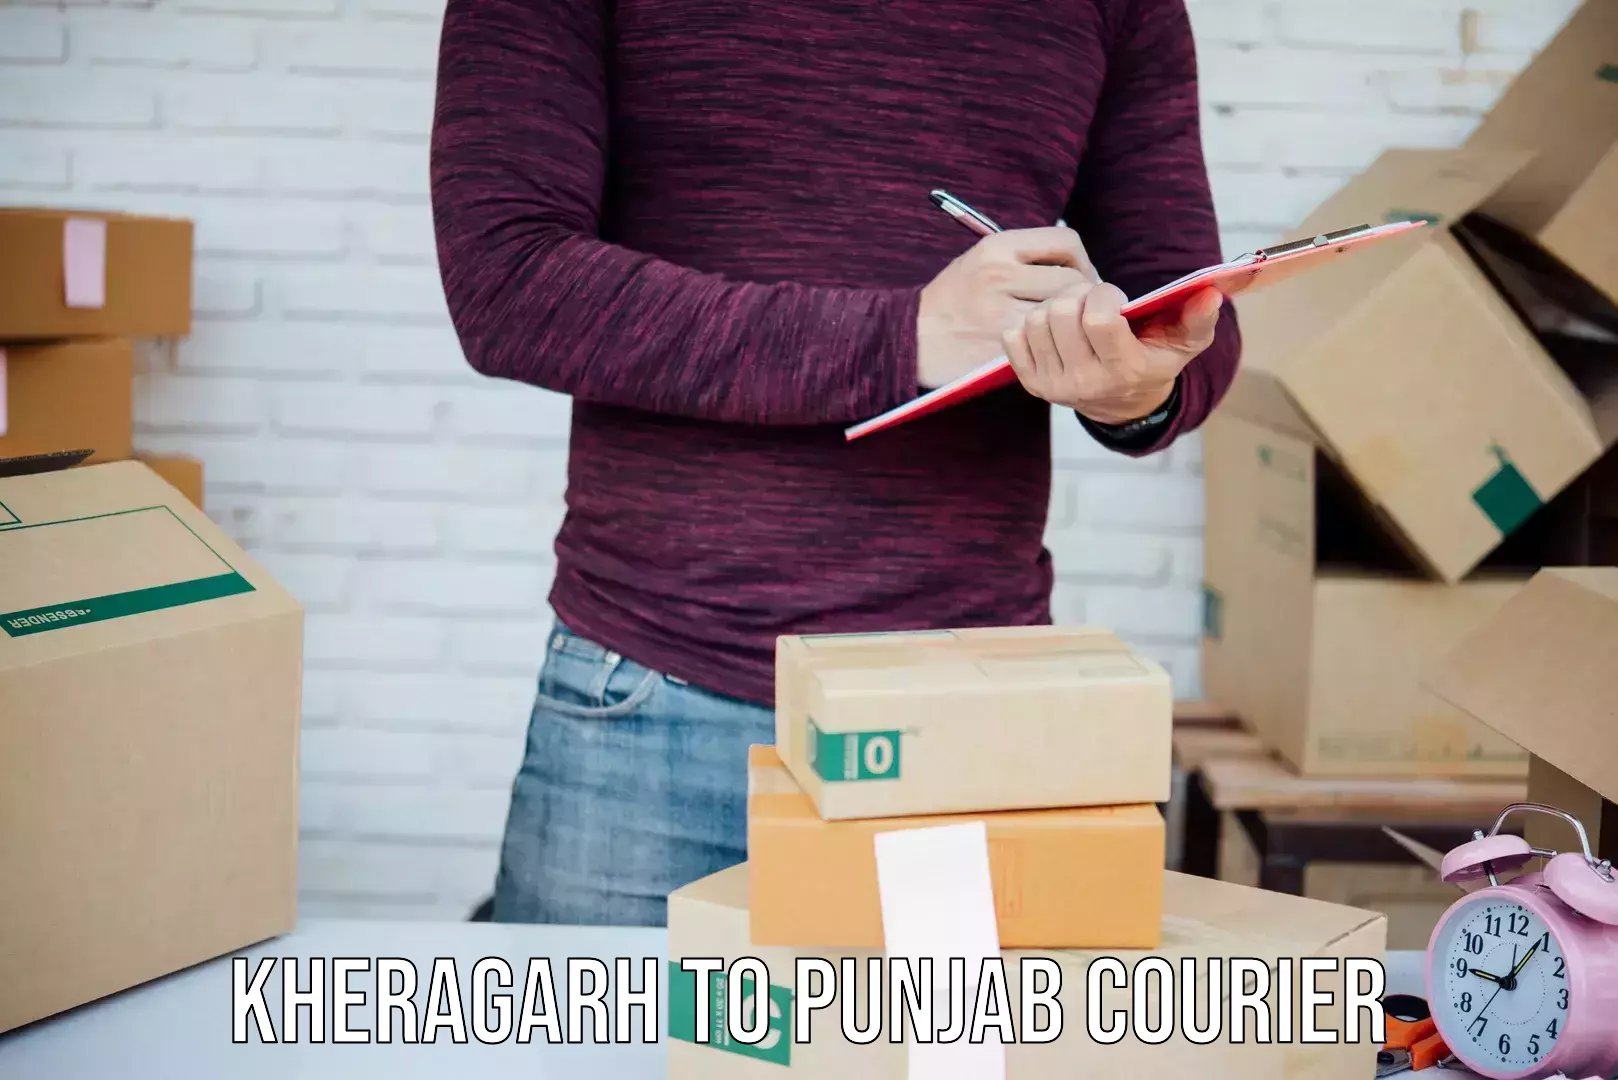 Efficient order fulfillment Kheragarh to Malout